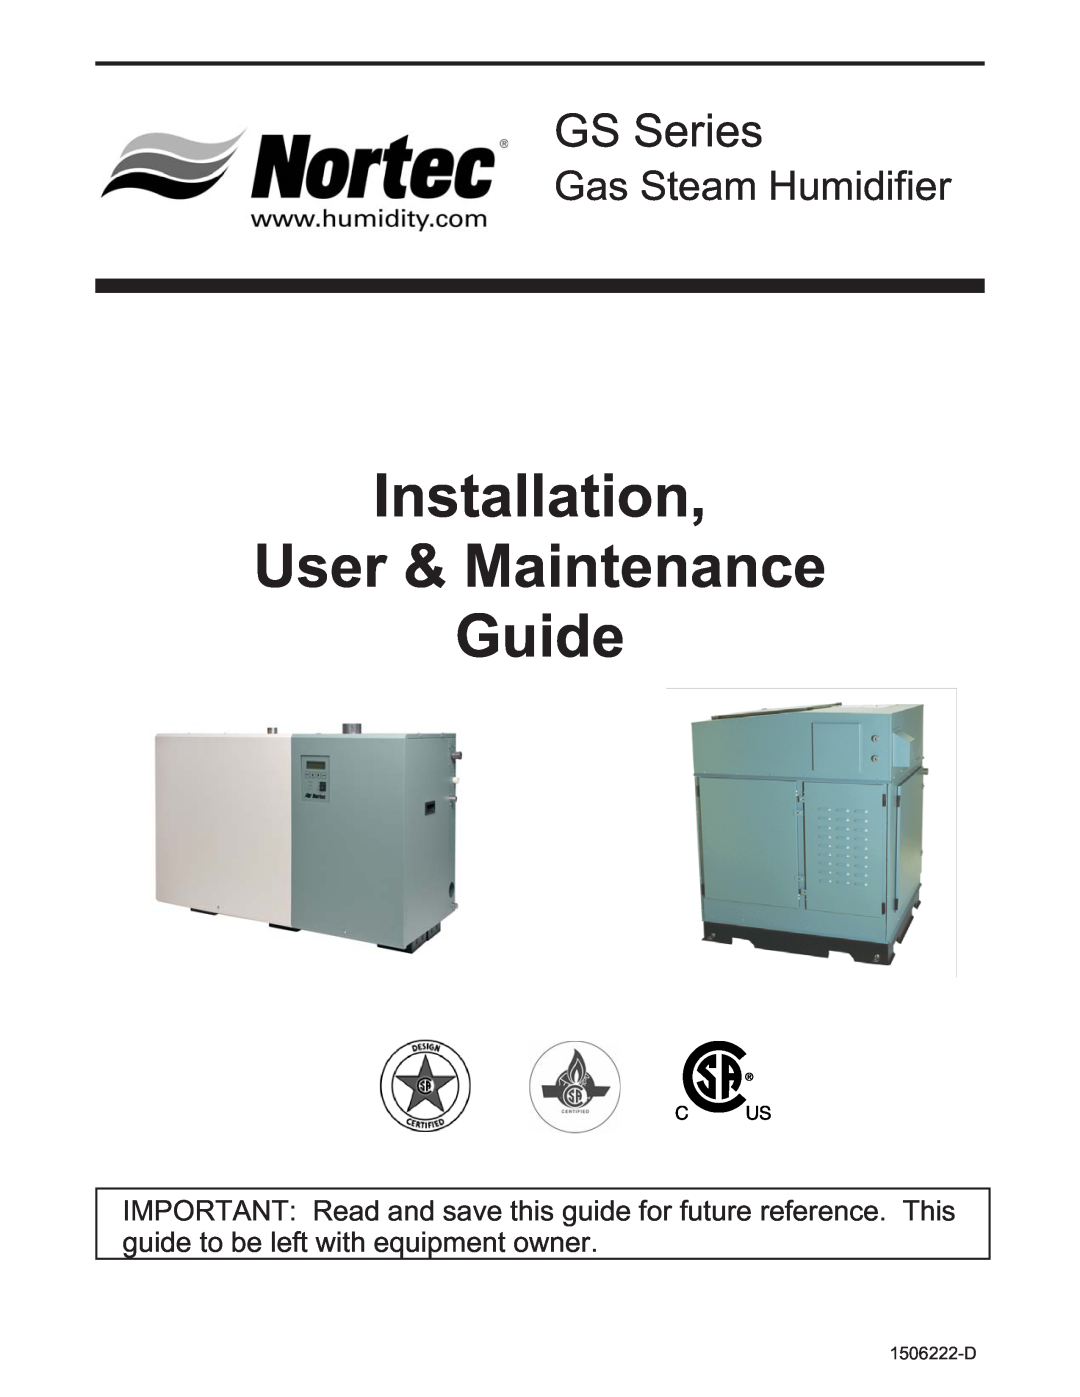 Nortec Industries GS Series manual Installation User & Maintenance Guide, Gas Steam Humidifier 